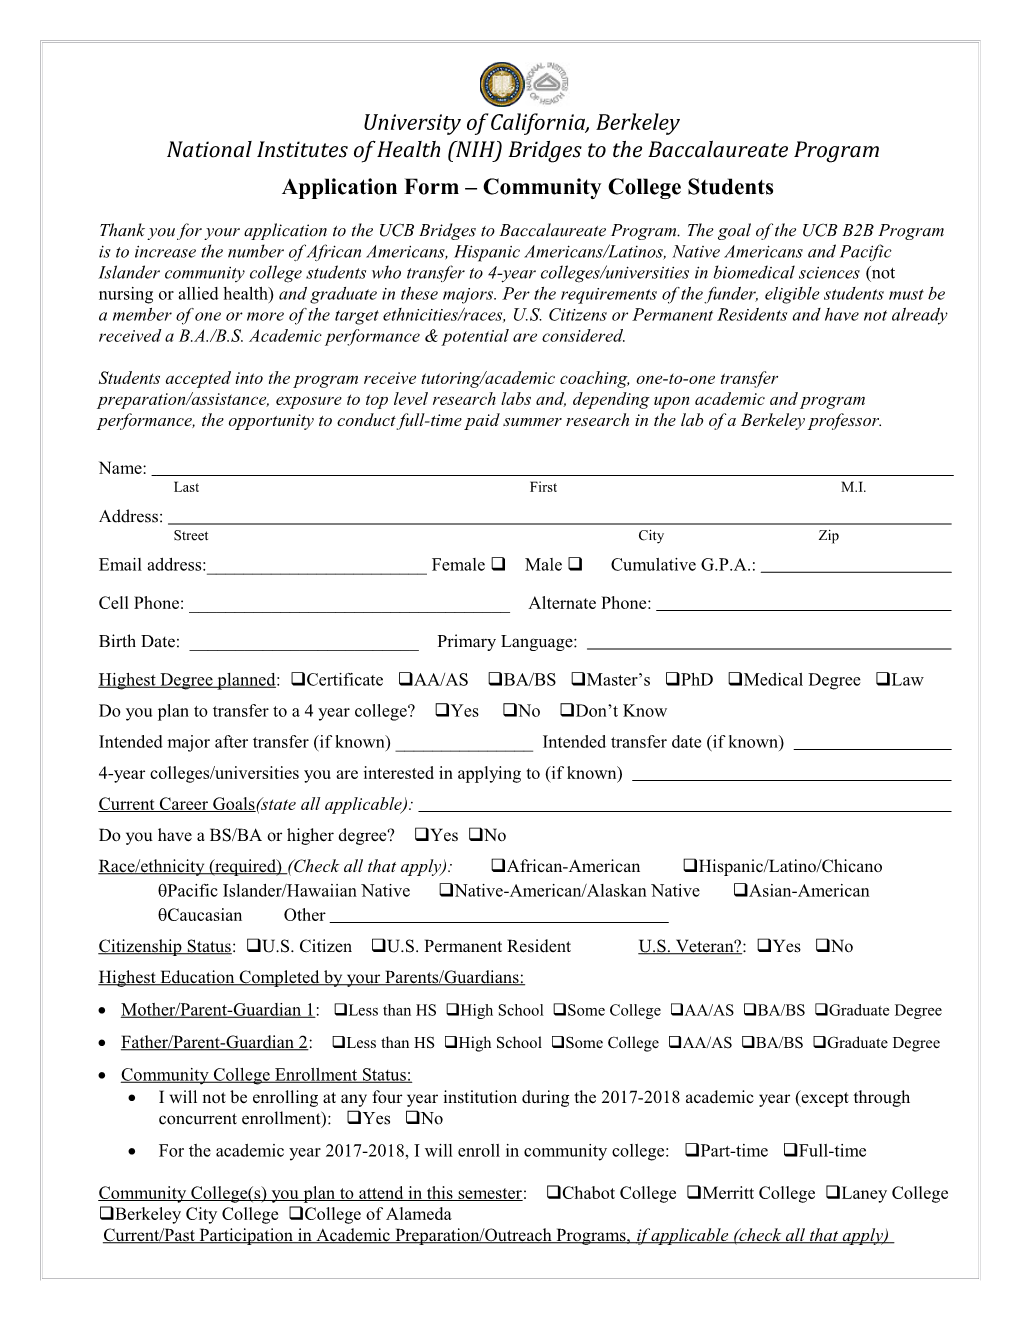 Application Form Community College Students